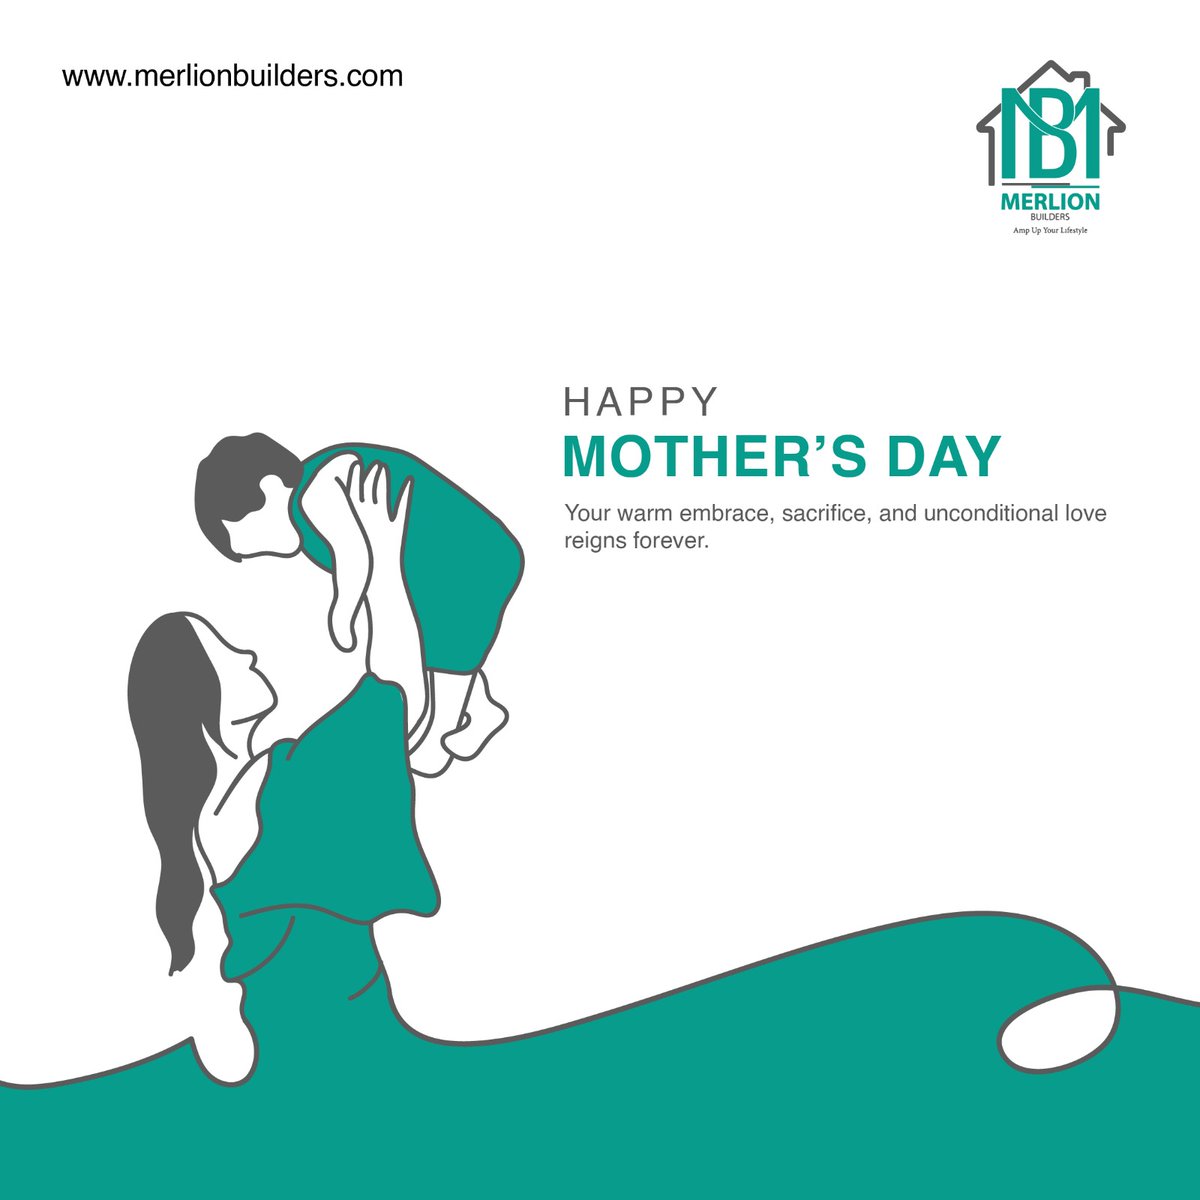 The love, care, and protection of a mother are beyond comparison. Today, we celebrate her for making this world better for us. Happy Mother's Day. #merlionbuilders #merliongalaxia #happymothersday #mothersday2024 #mothersdaywishes #momlife #mothersdaygift